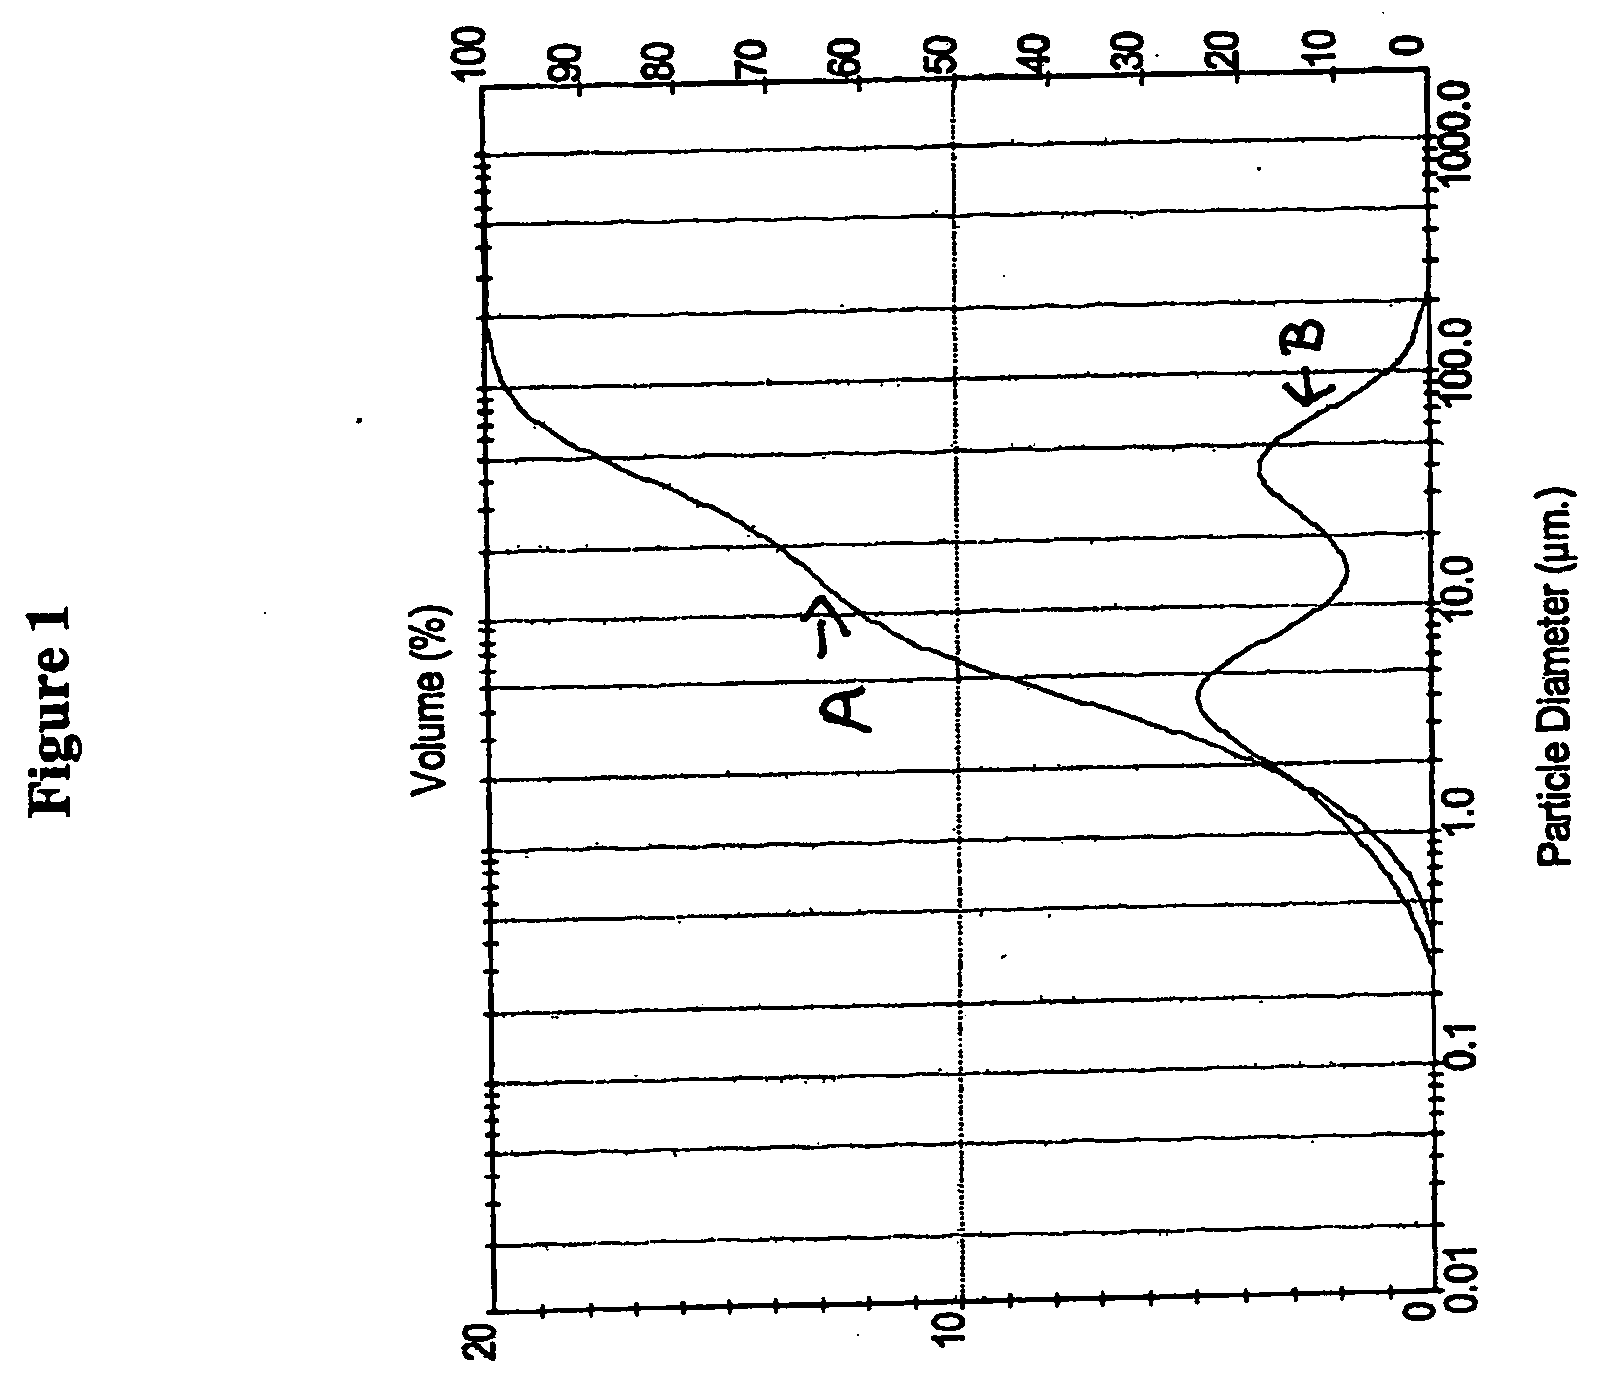 Solid particulate tadalafil having a bimodal particle size distribution